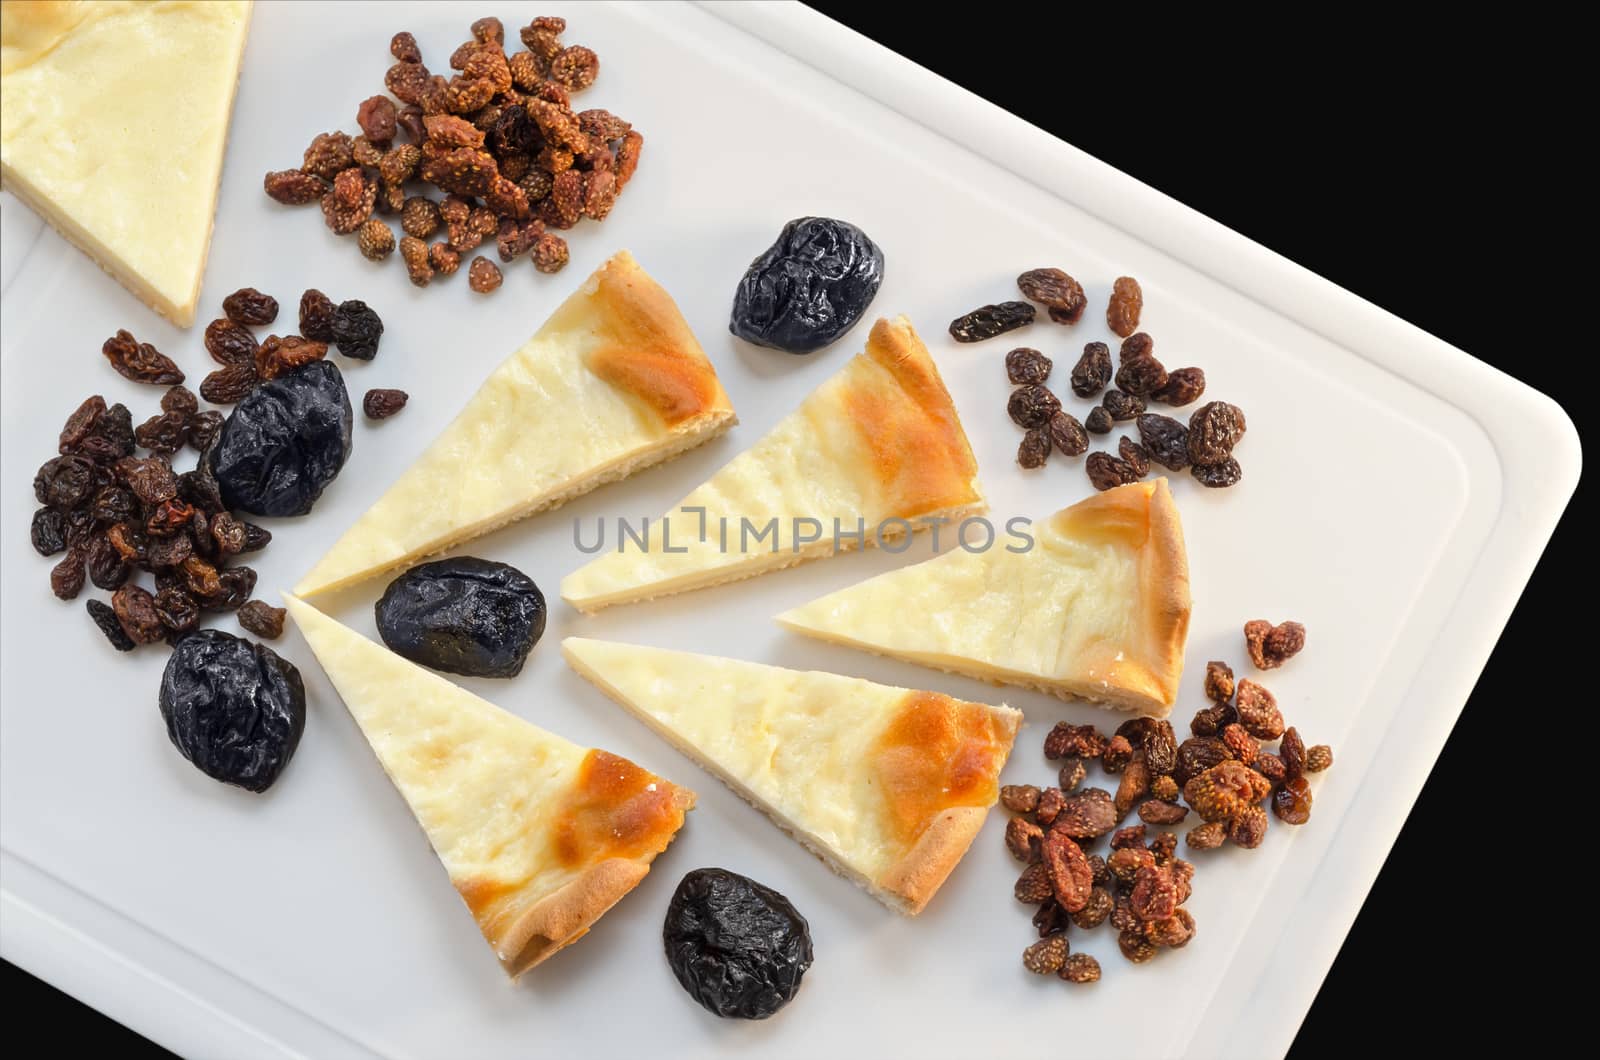 Cream pie and dried fruits on the table by Gaina